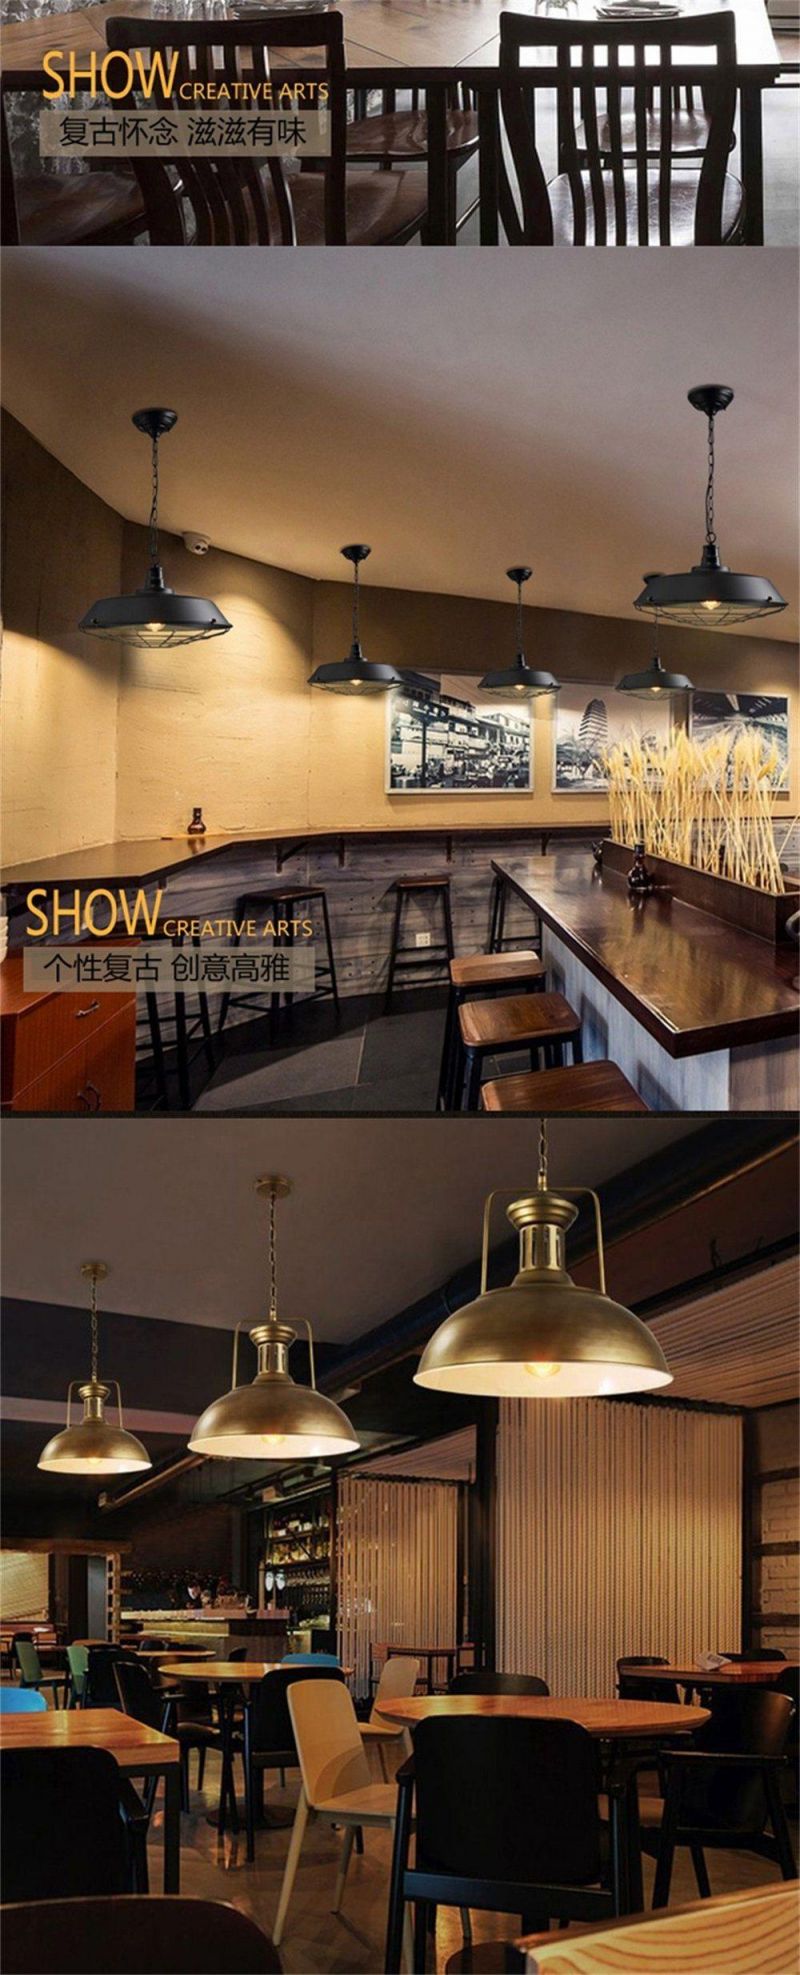 Loft Creative Personality American Country Warehouse Bar Counter Restaurant Vintage Industrial Style Iron Pot Cover Chandelier